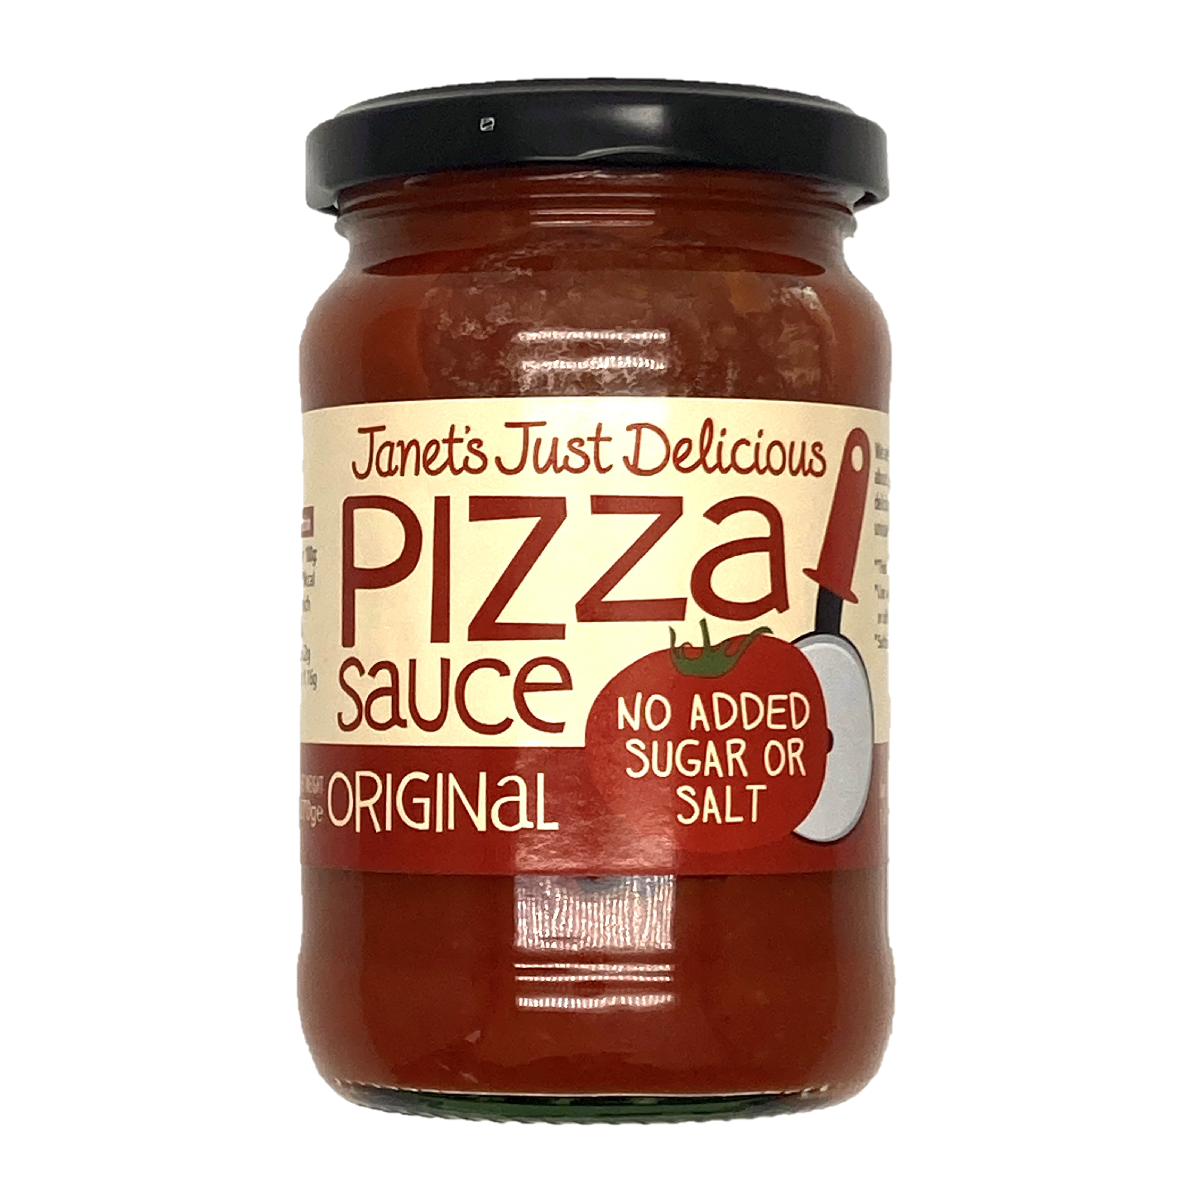 Janets Just Delicious Original Pizza Sauce 270g